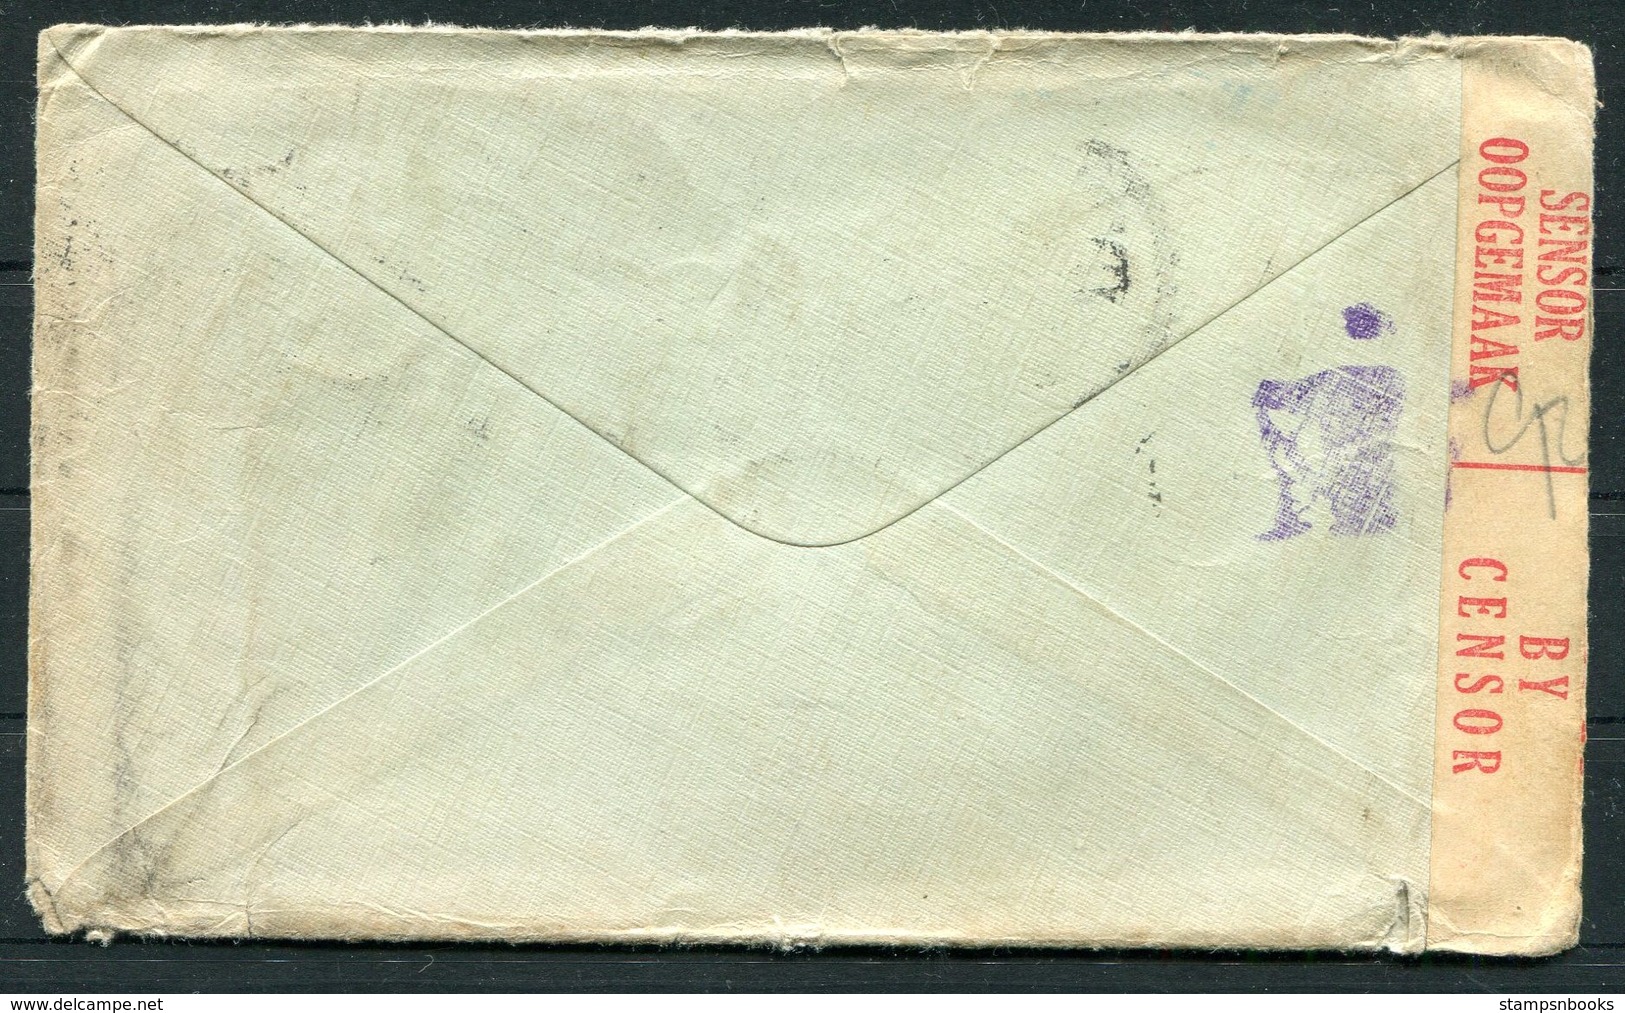 1945 South Africa Johannesburg 7/- Airmail Rate Censor Cover - Air Force, Miami Florida USA - Covers & Documents